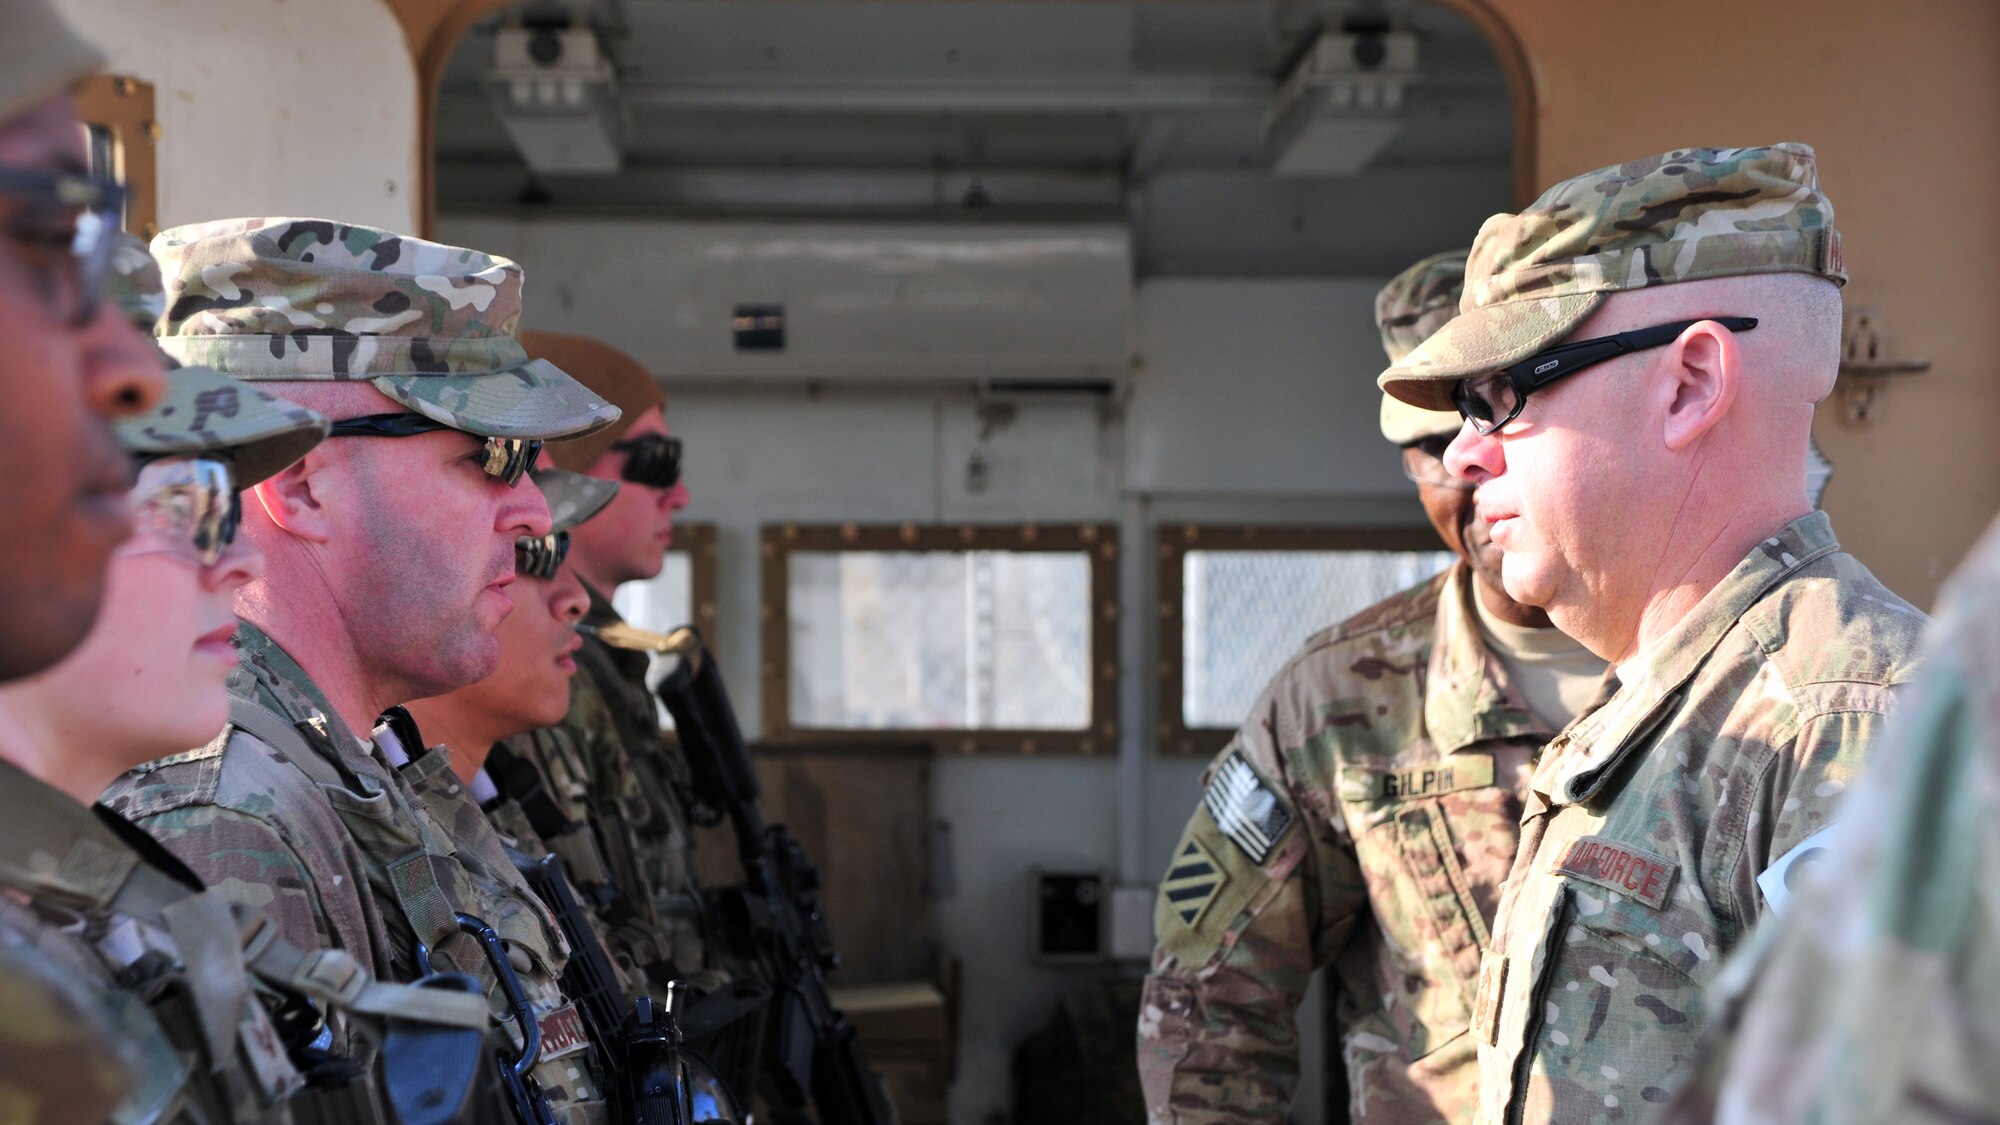 U.S. Air Force Chief Master Sgt. Mark Hammack, 455th Expeditionary Security Forces Squadron, and U.S. Army Command Sgt. Maj. Christopher Gilpin, Combined Joint Task Force 3 United States Forces Afghanistan, meet with defenders during a tour Jan. 6, 2015 at Bagram Airfield, Afghanistan. During the tour, Gilpin had the opportunity to meet with 455th Air Expeditionary Wing leadership and become better acquainted with Air Force assets and squadrons. (U.S. Air Force photo by Staff Sgt. Whitney Amstutz/released)